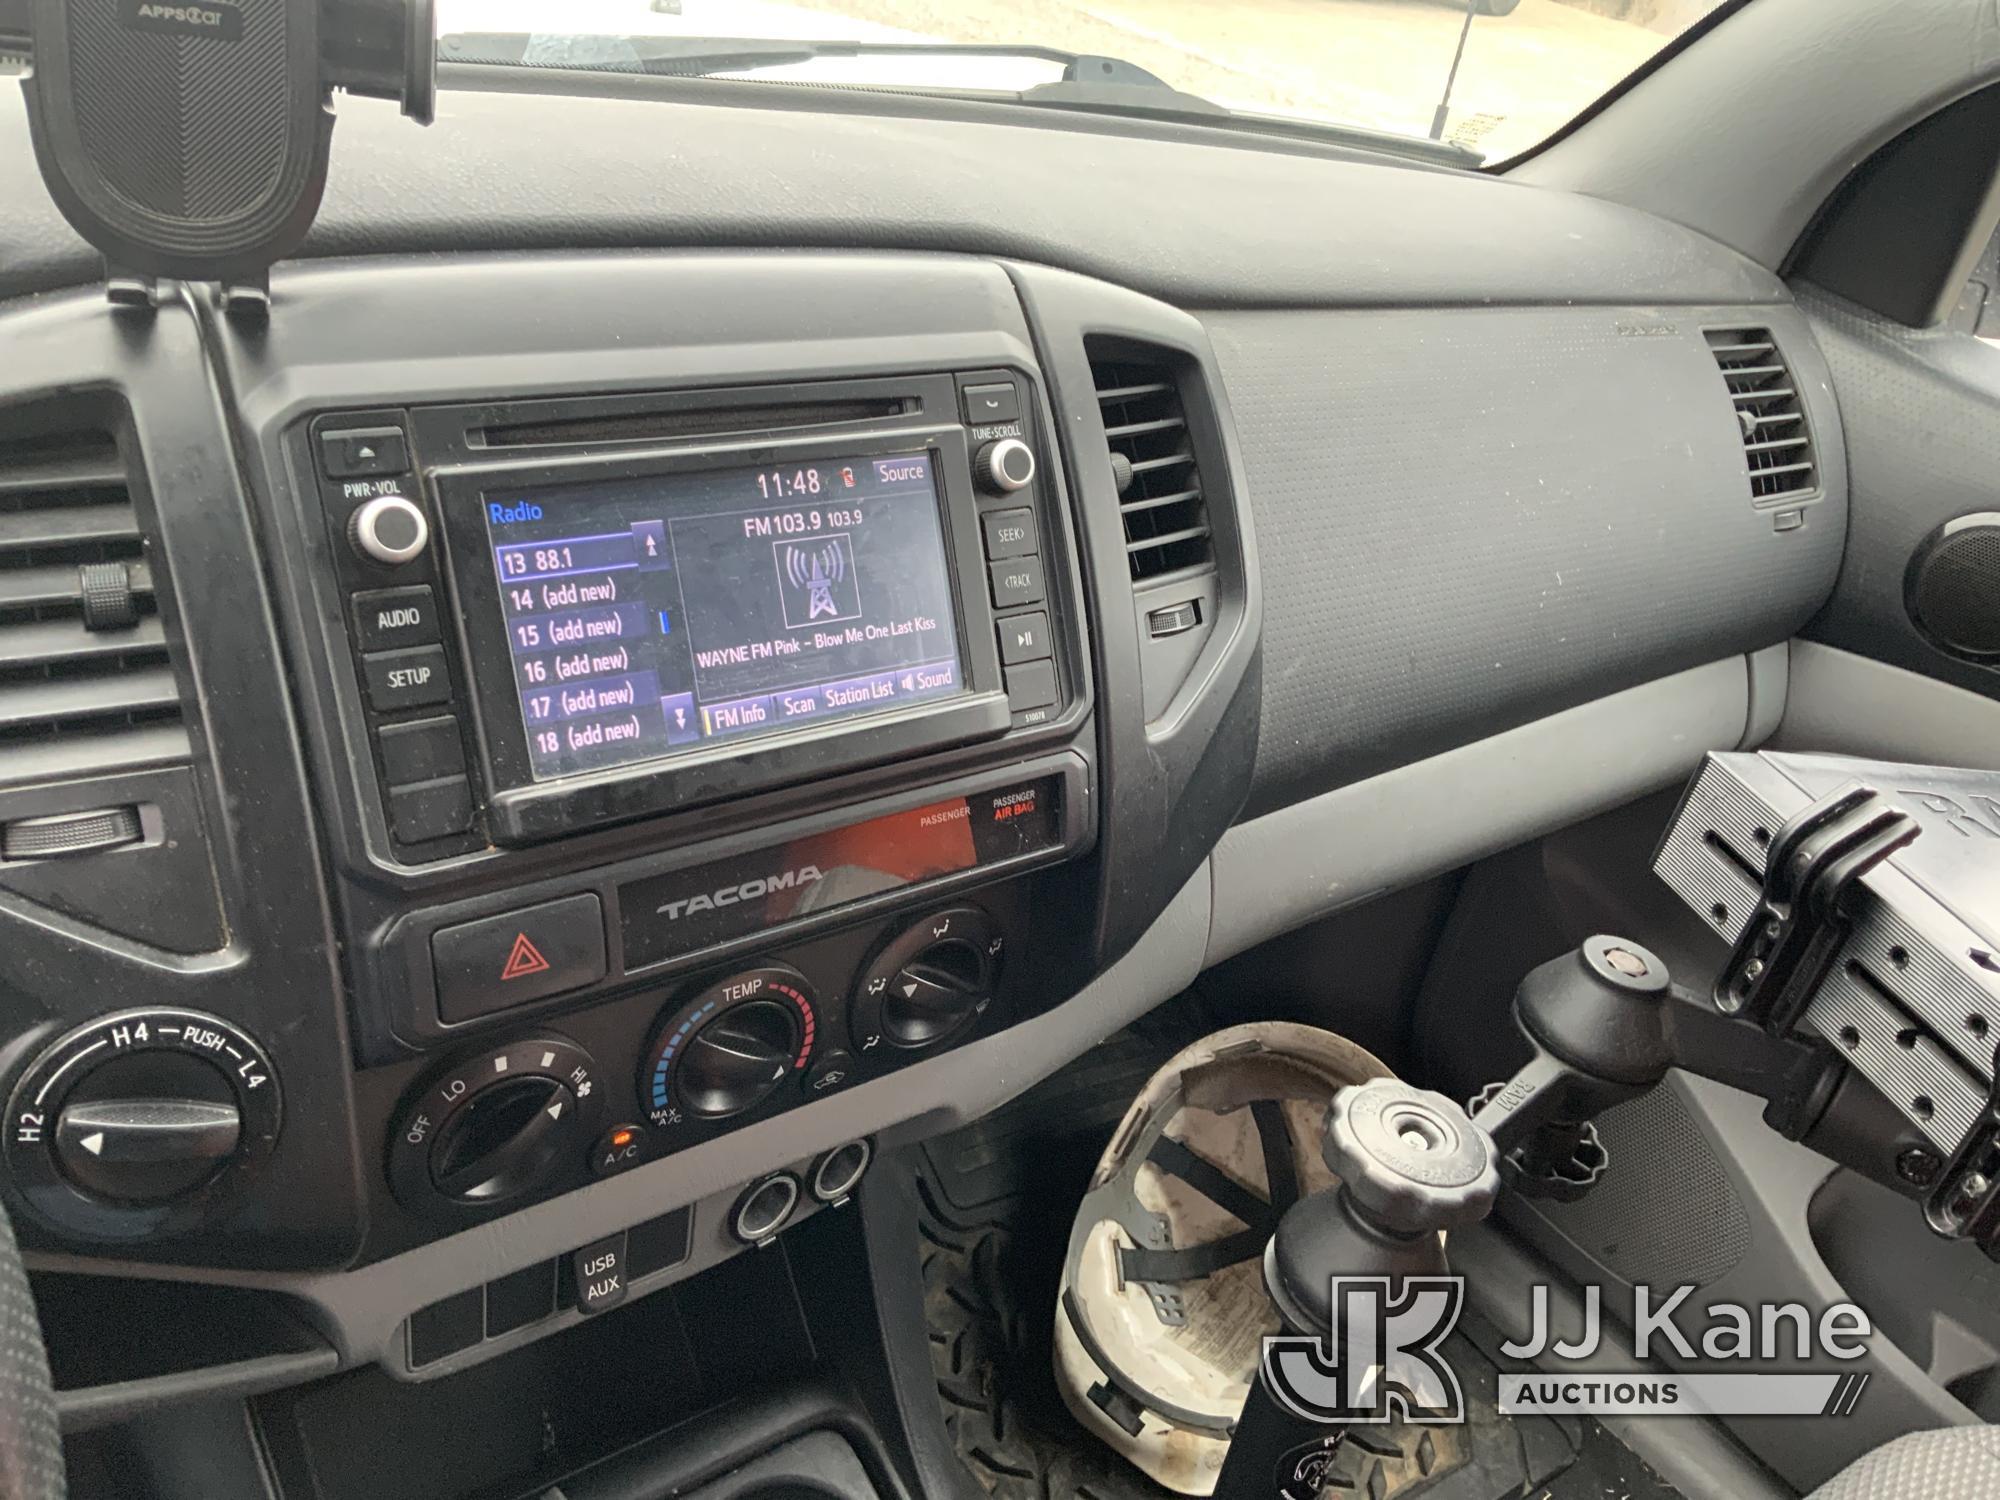 (Fort Wayne, IN) 2015 Toyota Tacoma 4x4 Extended-Cab Pickup Truck Runs & Moves